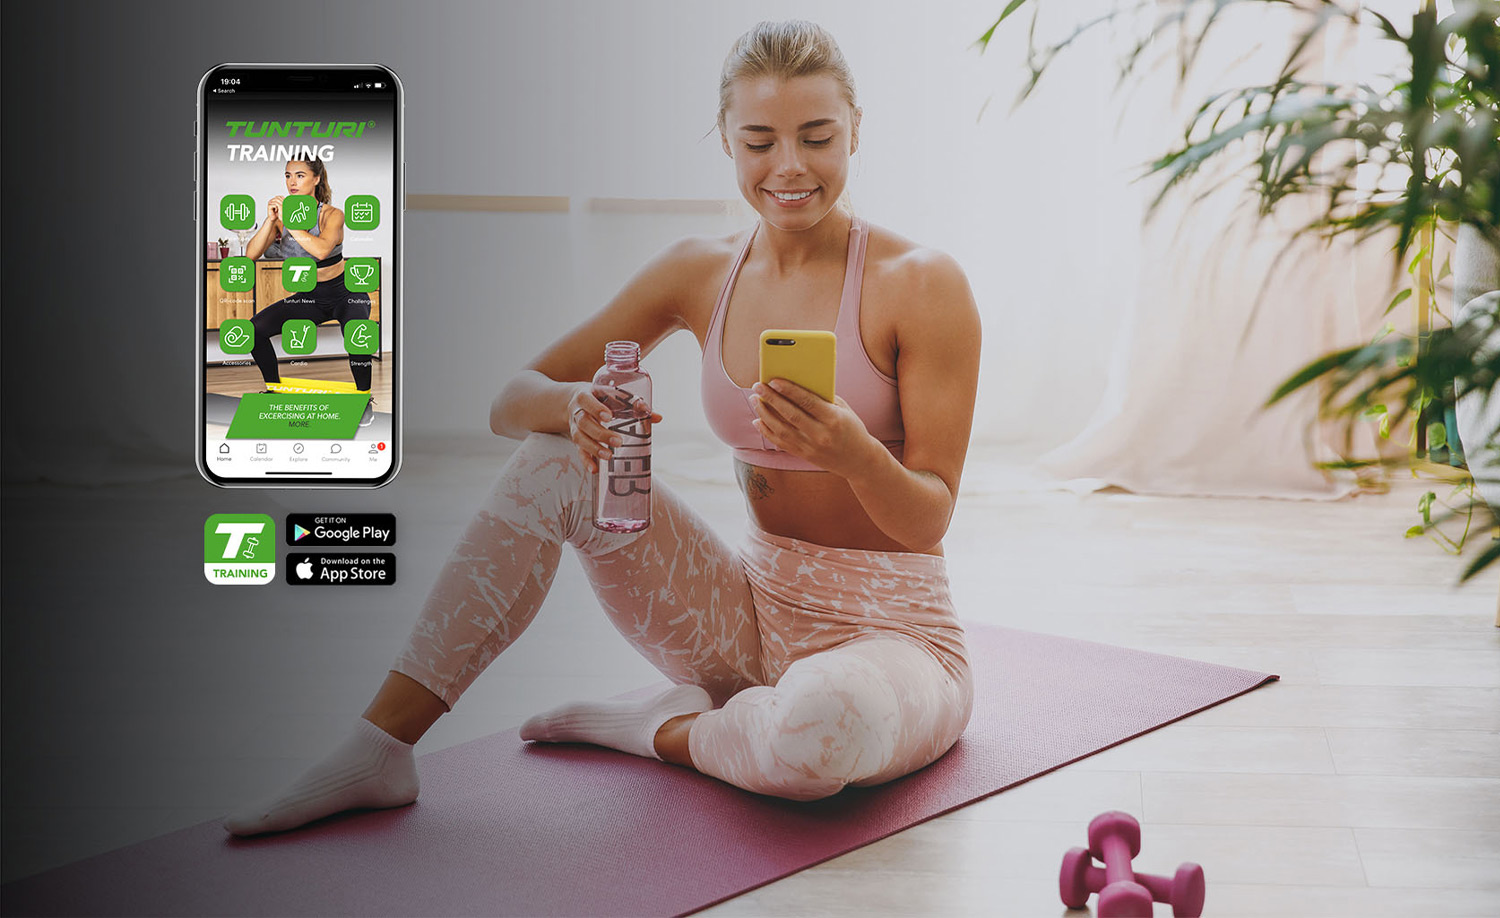 Tunturi Training app: the free training app that works in tandem with your fitness equipment